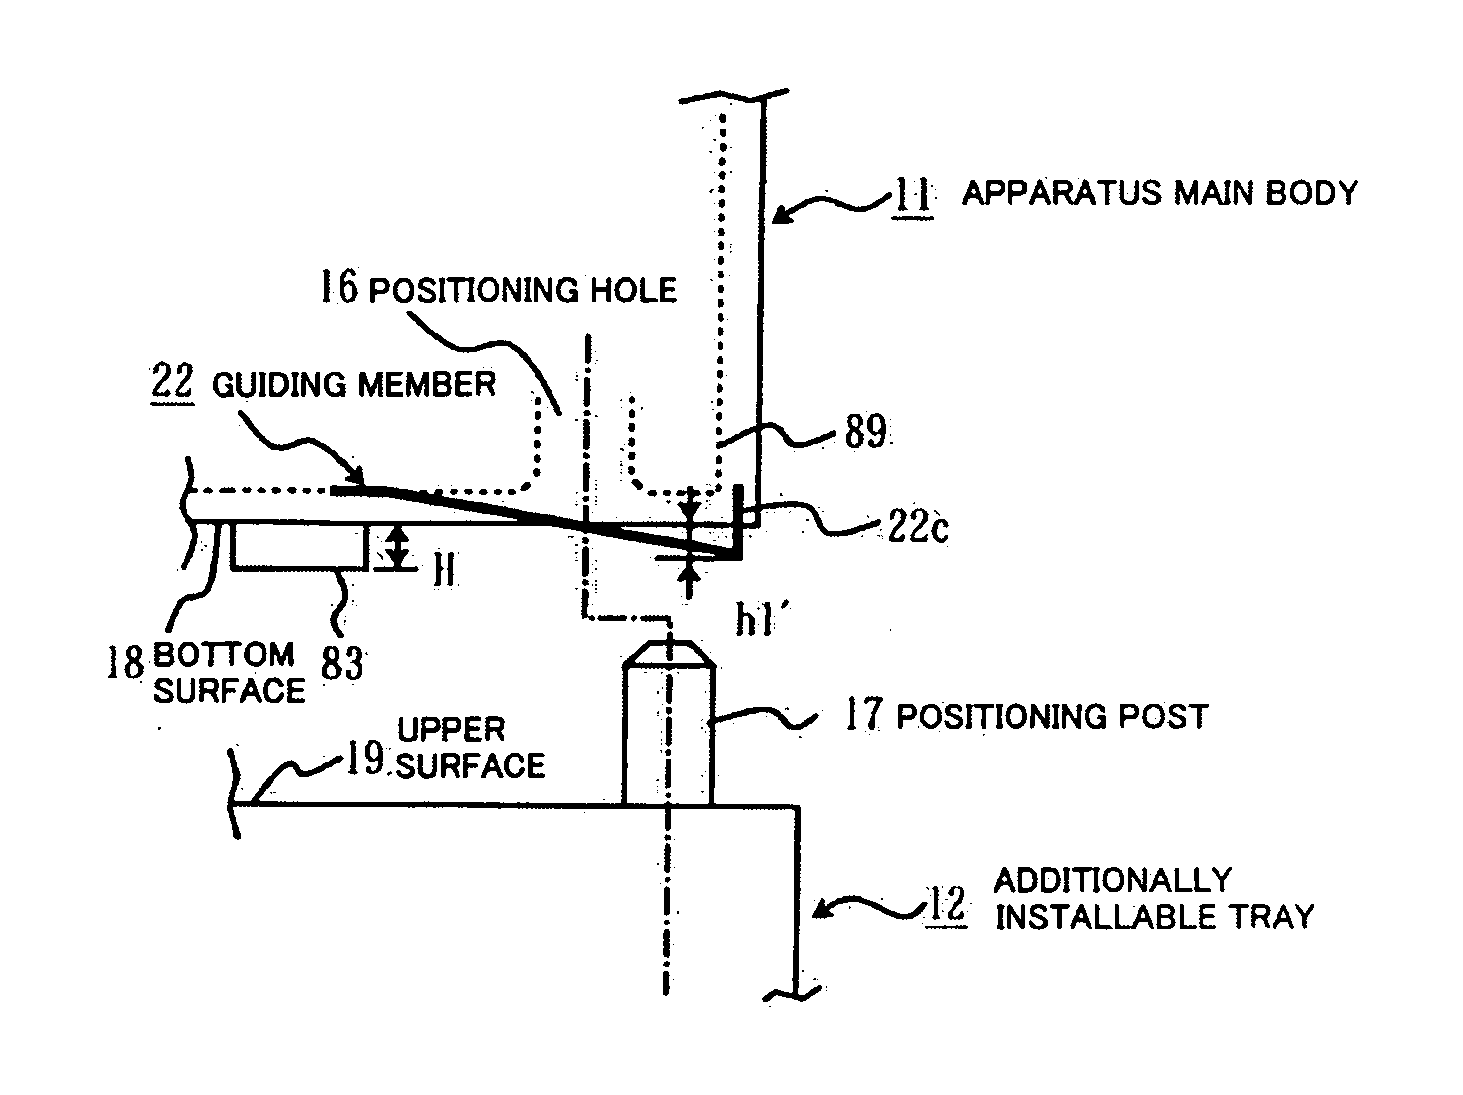 Image forming apparatus and additionally installable apparatus